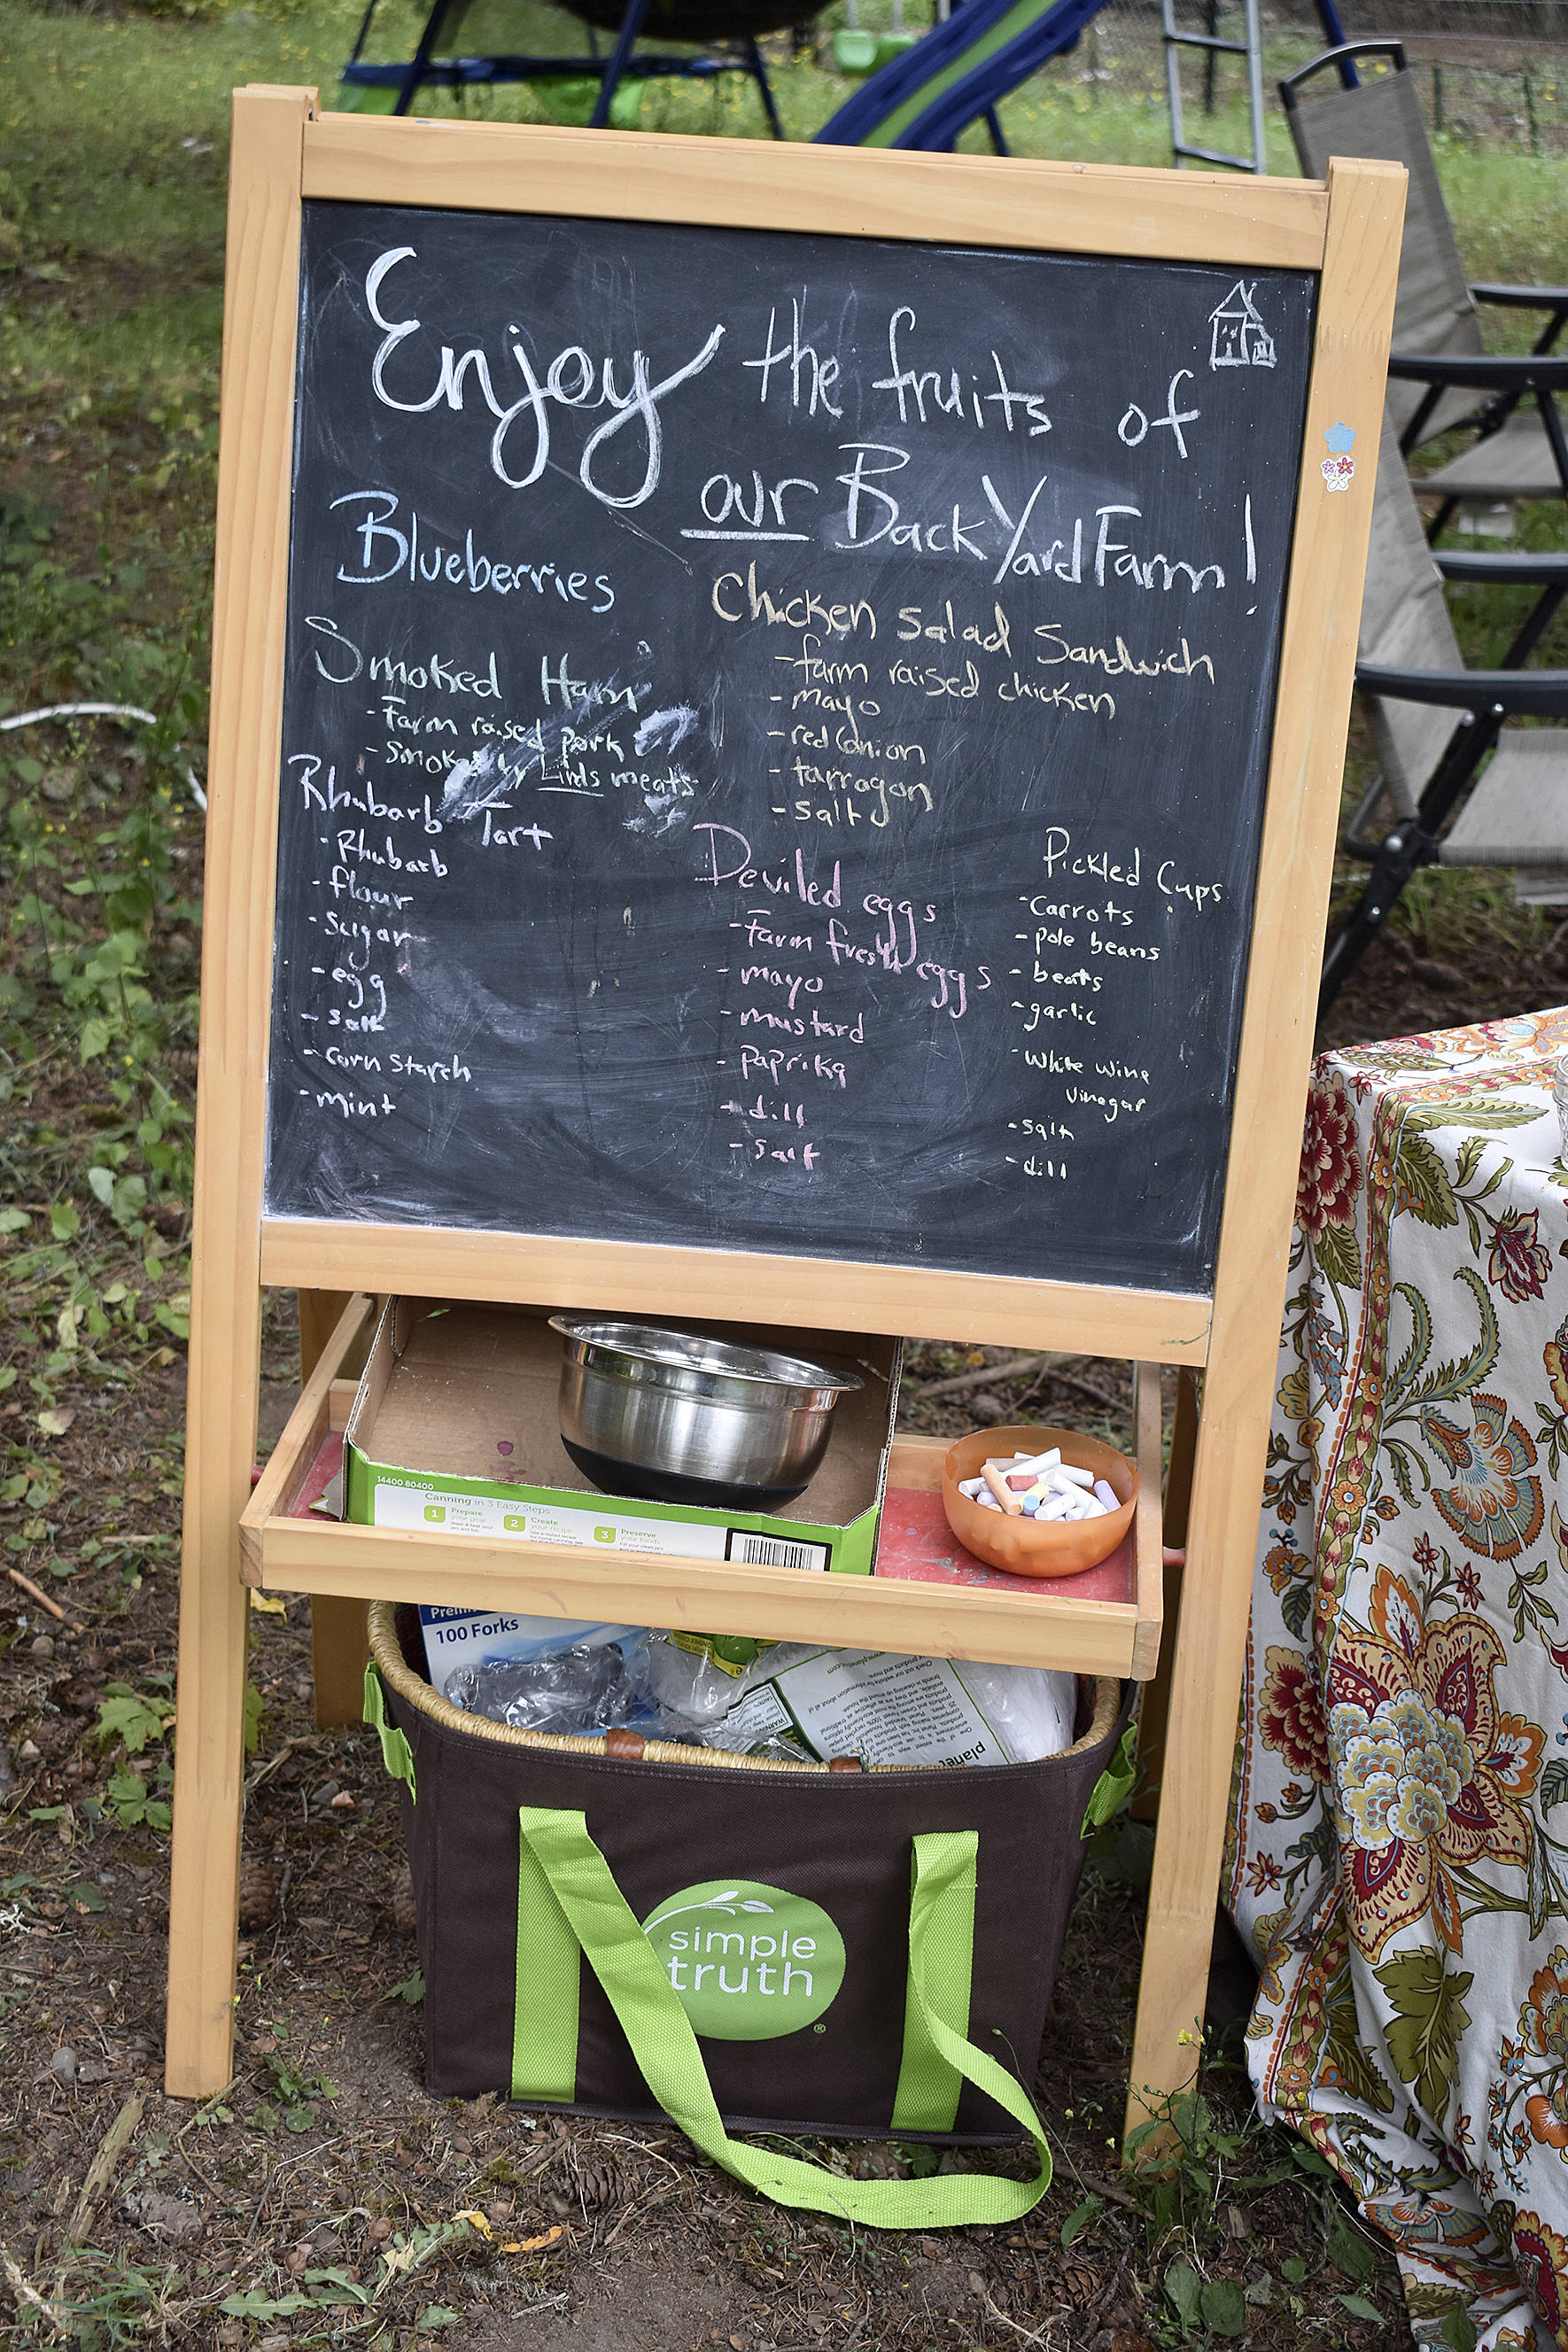 Photos by Haley Ausbun. The BackYardFarm, a local couple trying to help folks with small yards build their own farm, hosted an event July 27, where guests could meet the animals, feed the goats and eat food sourced from their own back yard.